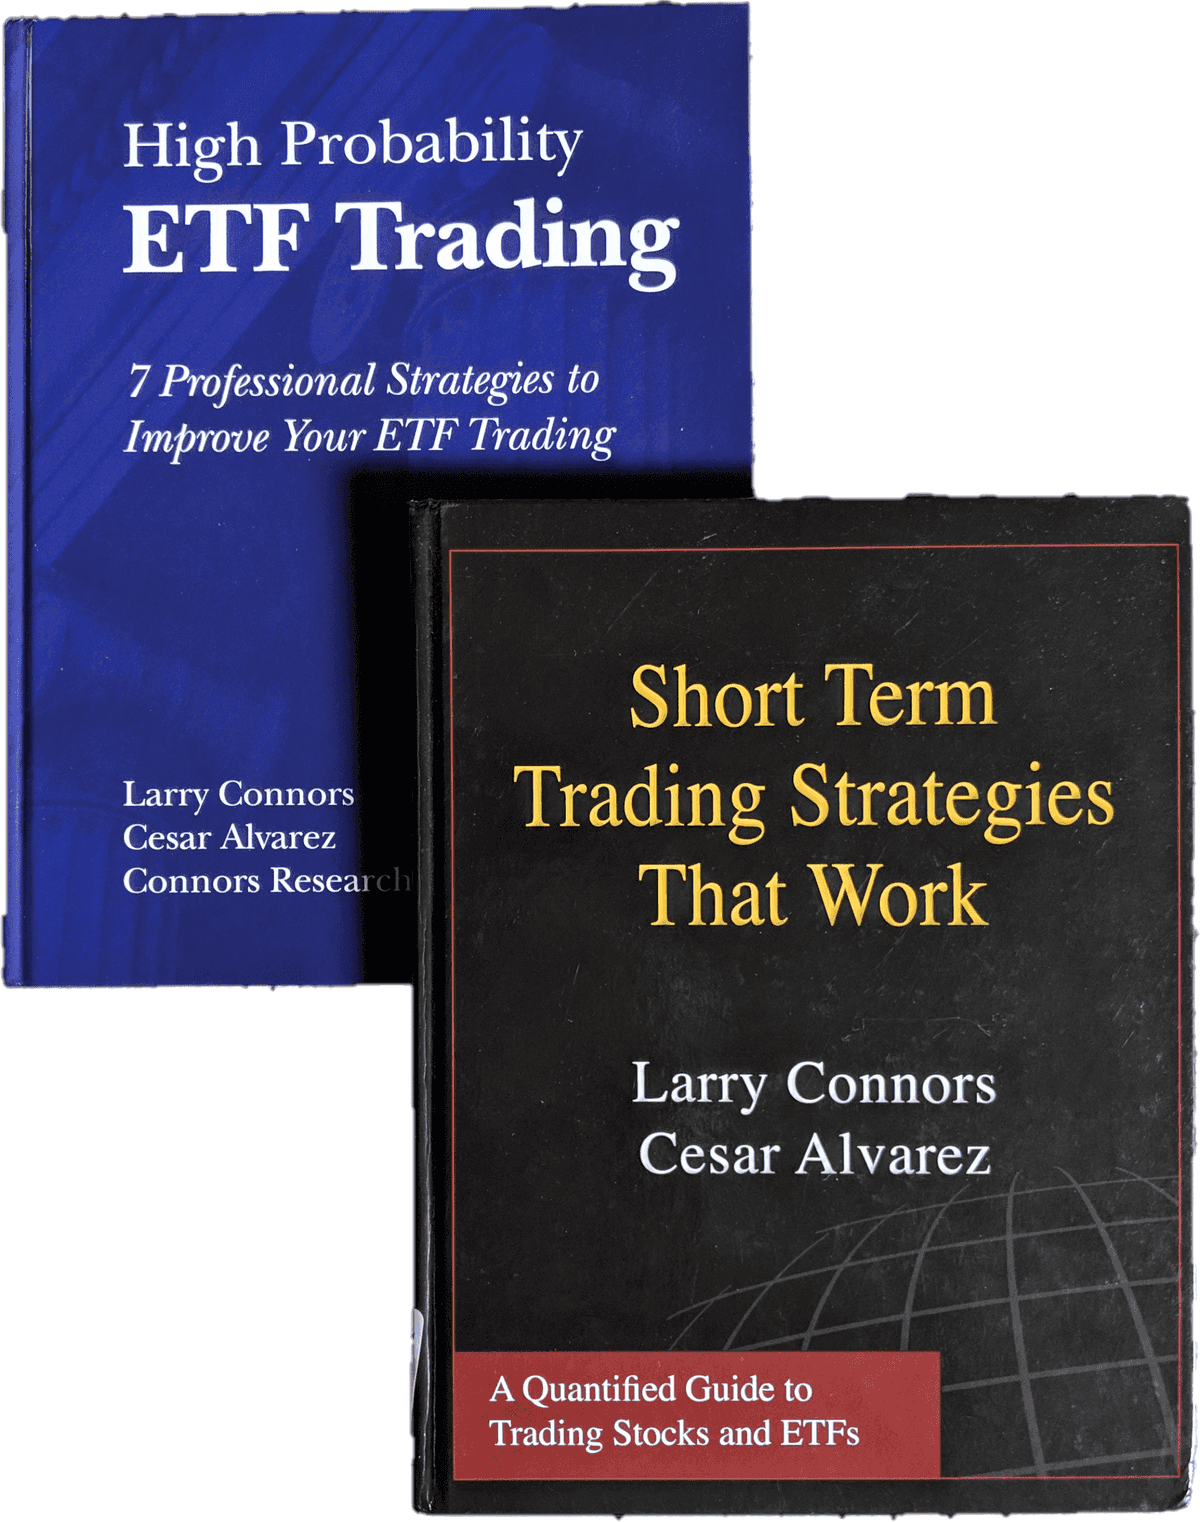 TuringTrader implements Larry Connors' strategies